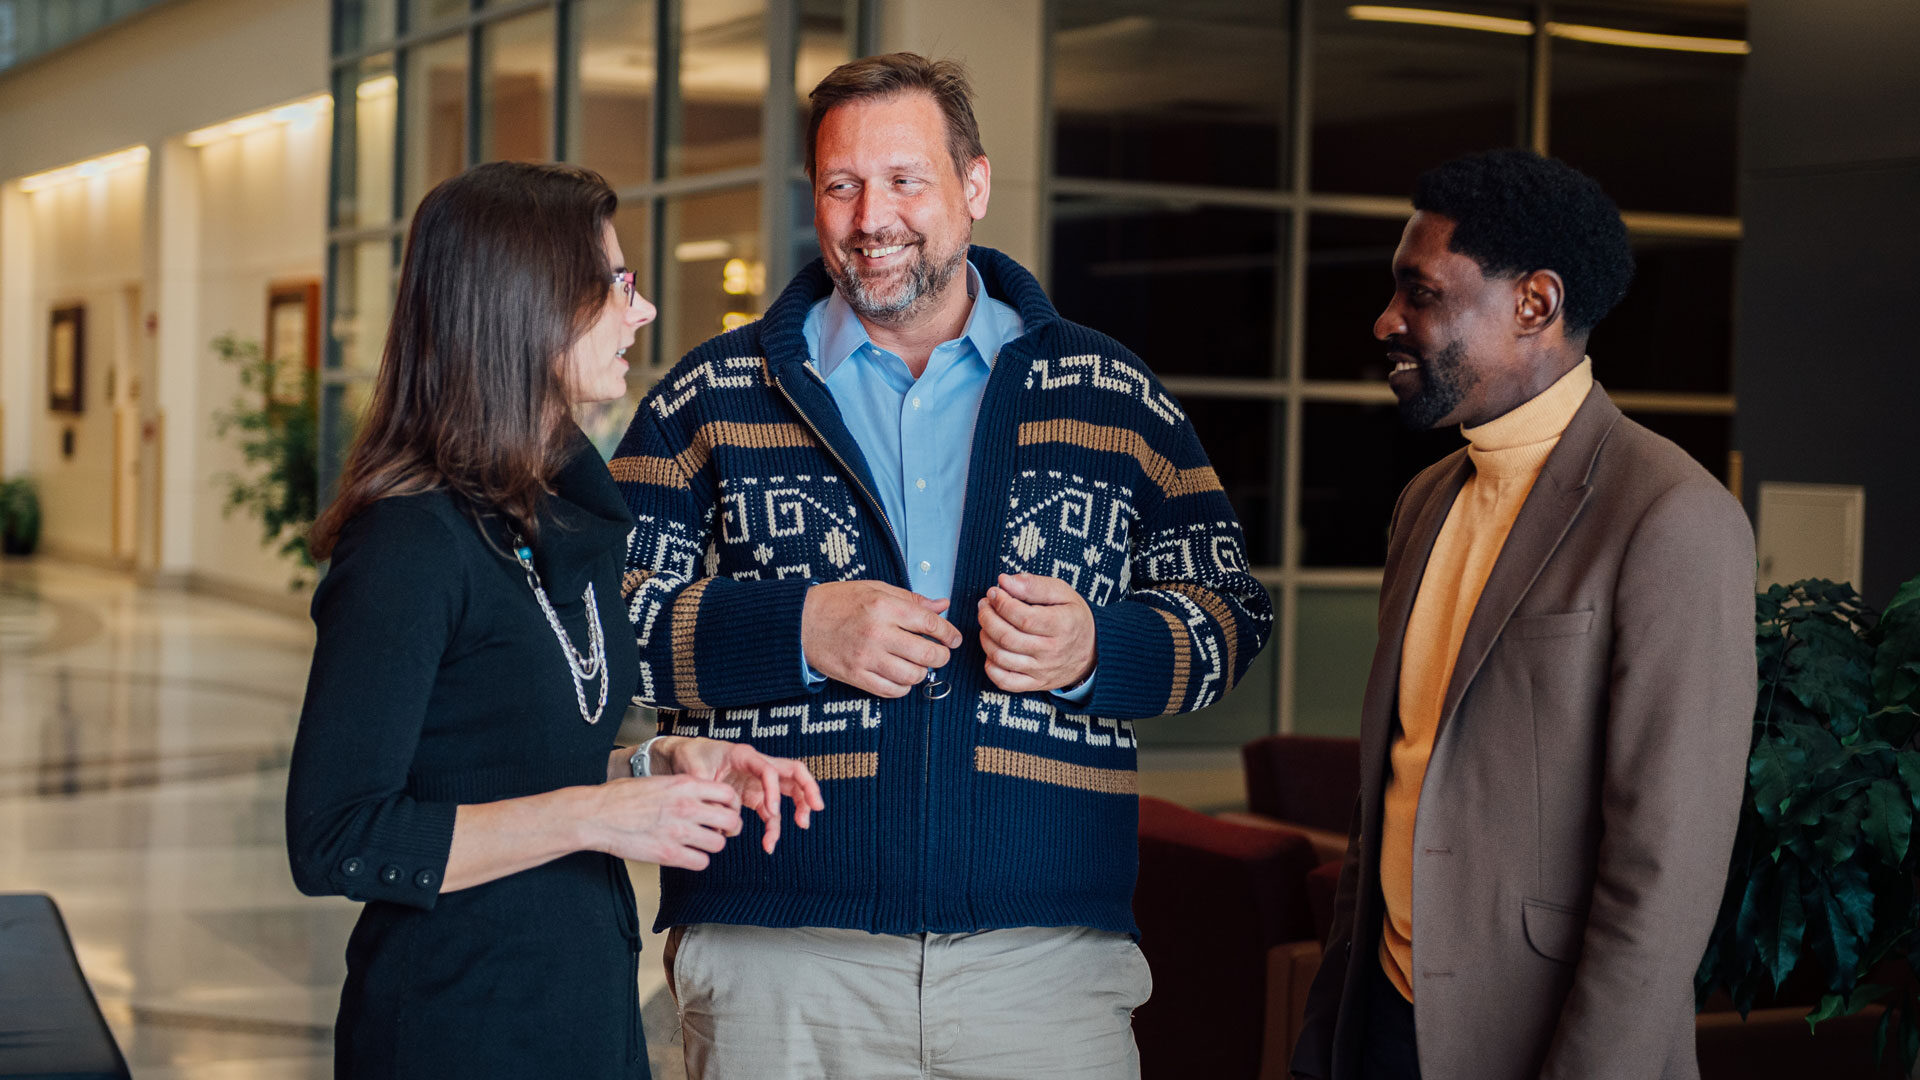 David Umulis, center, chats with biomedical engineering faculty members Jacqueline Linnes, left, and Leo Green, right, at Purdue’s Martin C. Jischke Hall of Biomedical Engineering. (Photo by Jon Garcia/Purdue Marketing and Communications)